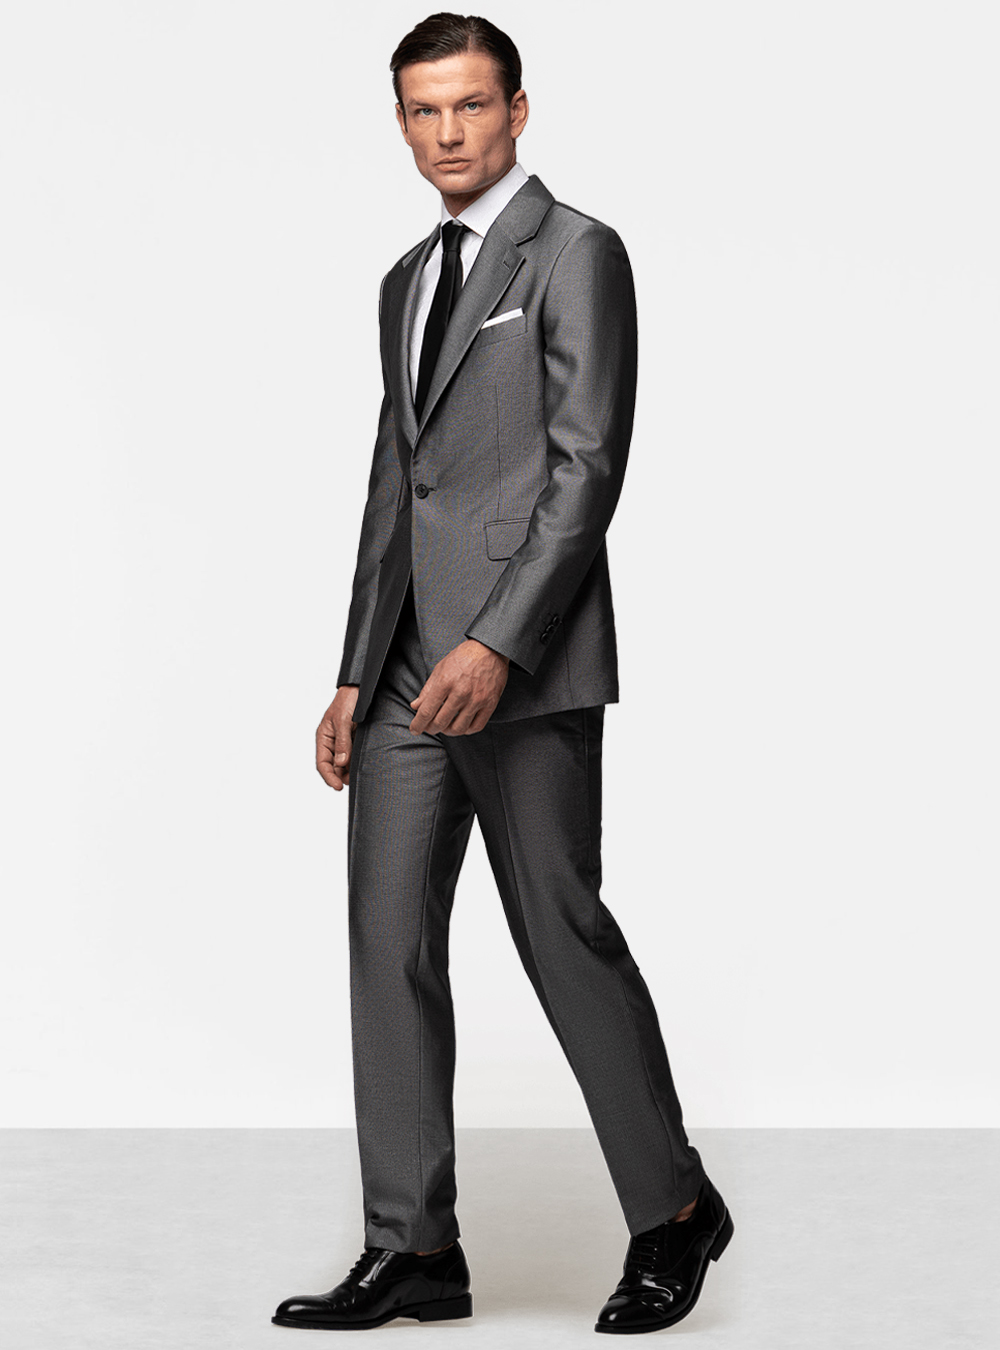 Charcoal suit, white dress shirt, black tie and black oxford shoes